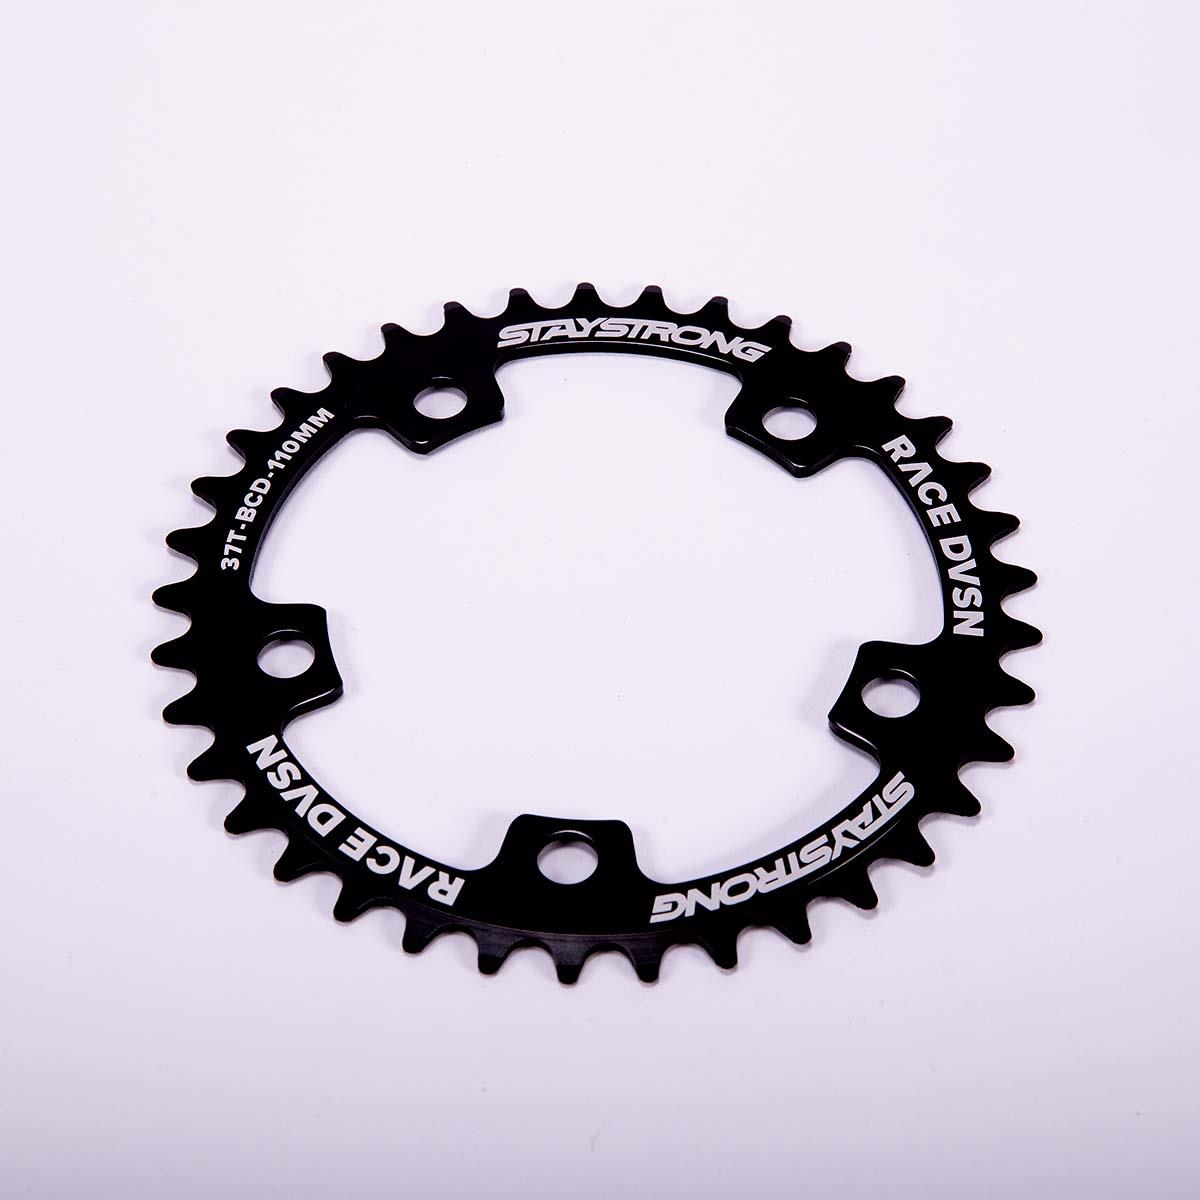 Stay Strong 7075 Alloy 5 Bolt Race Chainring Black / 40T